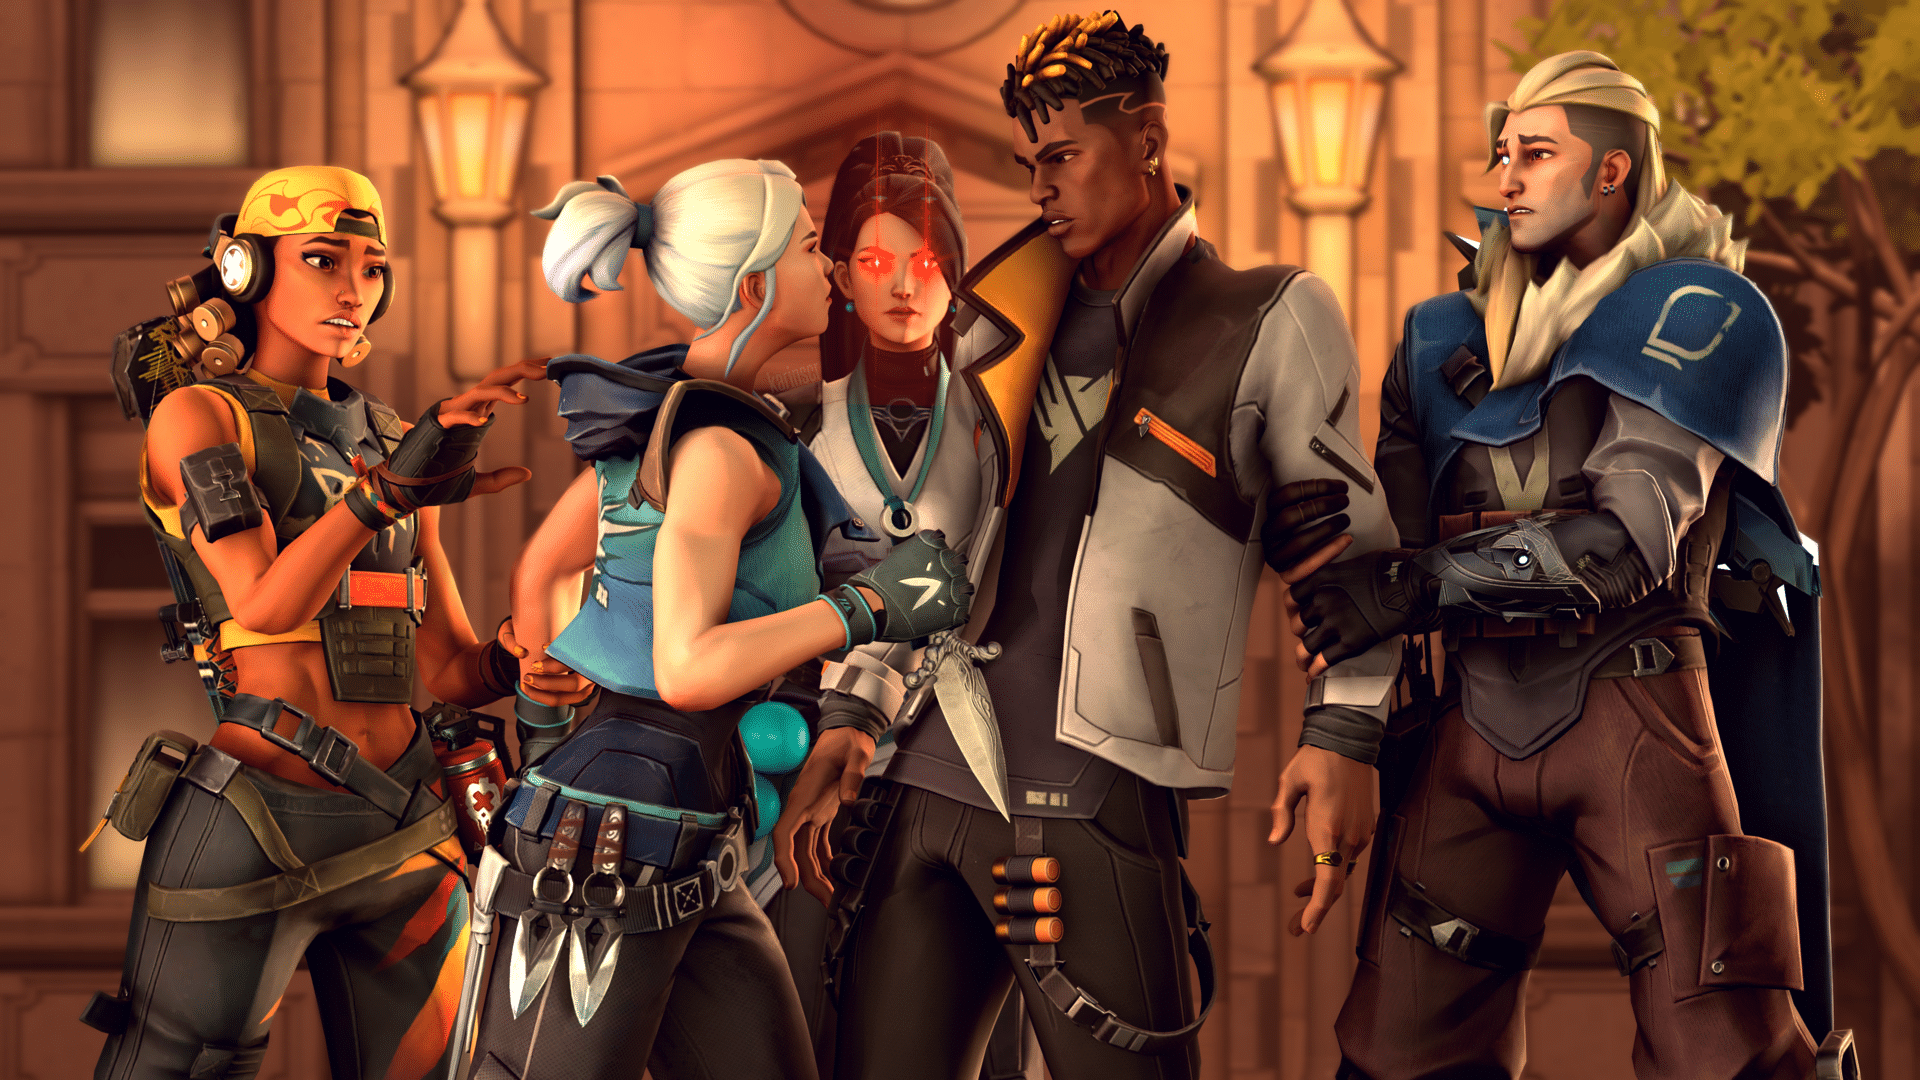 Image by karinscr – Phoenix and Jett having an argument while Sage, Sova, and Raze are trying to settle them down.